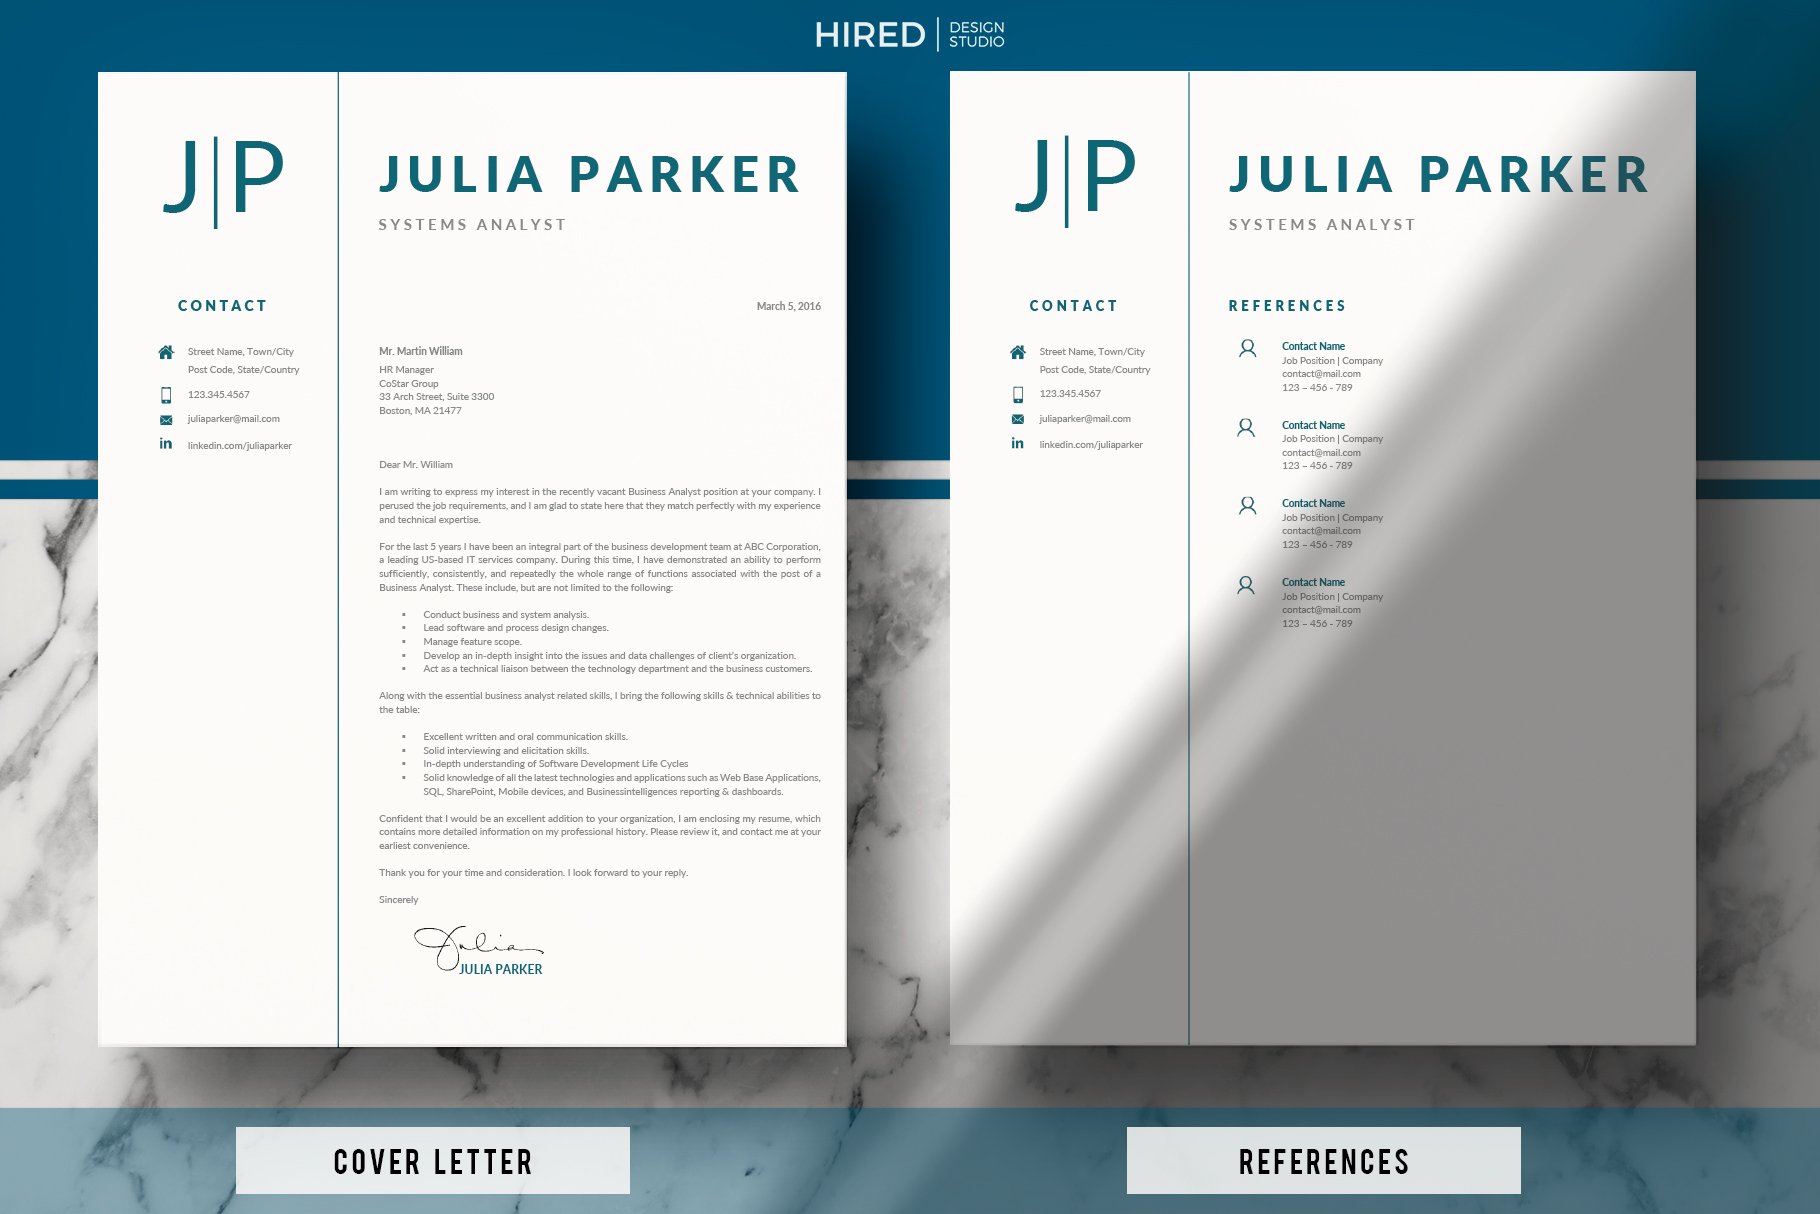 Professional resume and cover letter on a marble background.